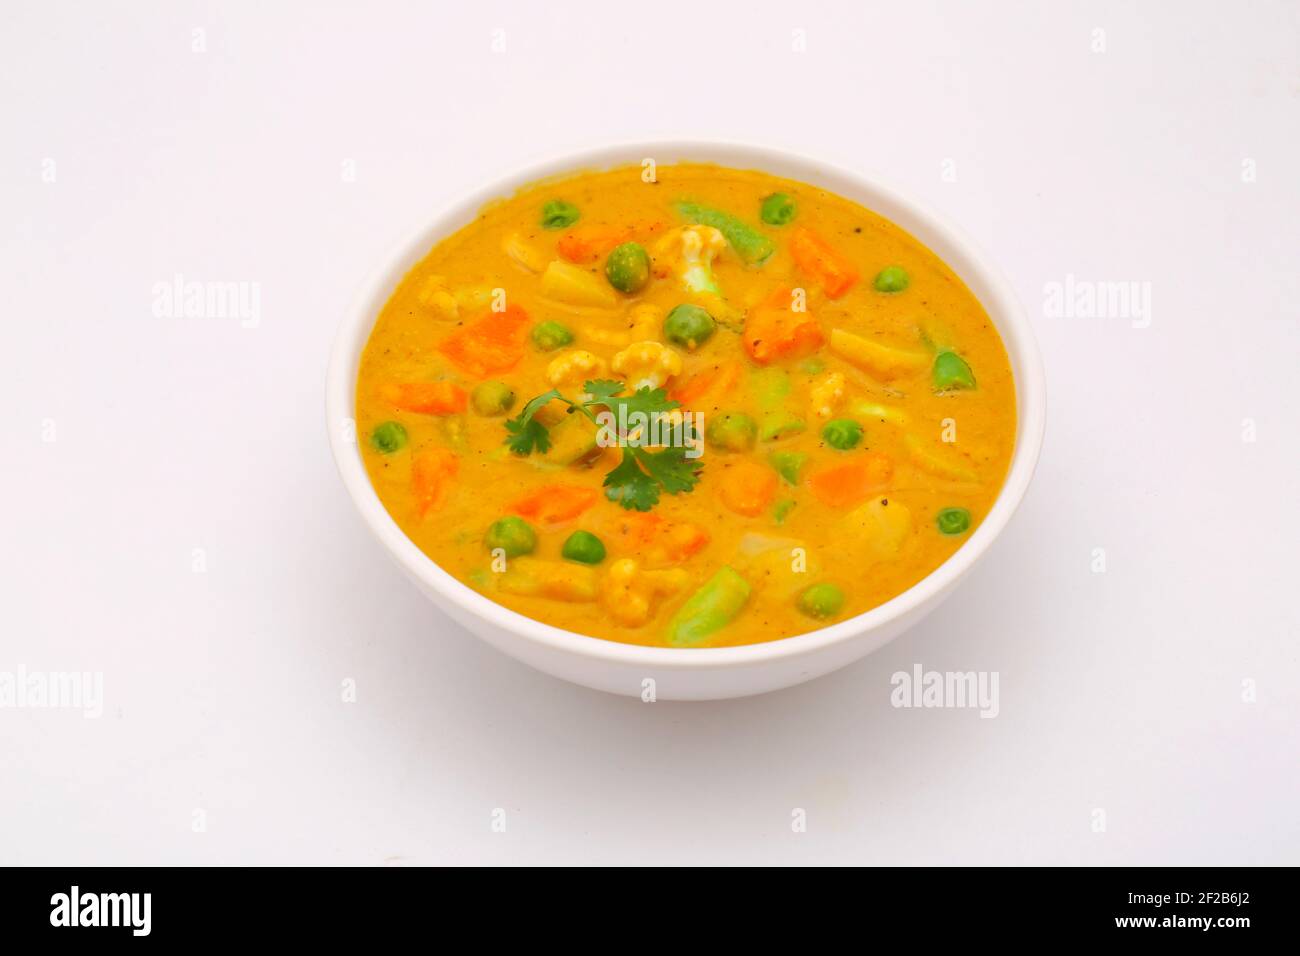 Mixed veg curry or kurma  tasty indian dish made of different vegetables like cauliflower, carrot, potato, green peas and garnished with onion pieces Stock Photo